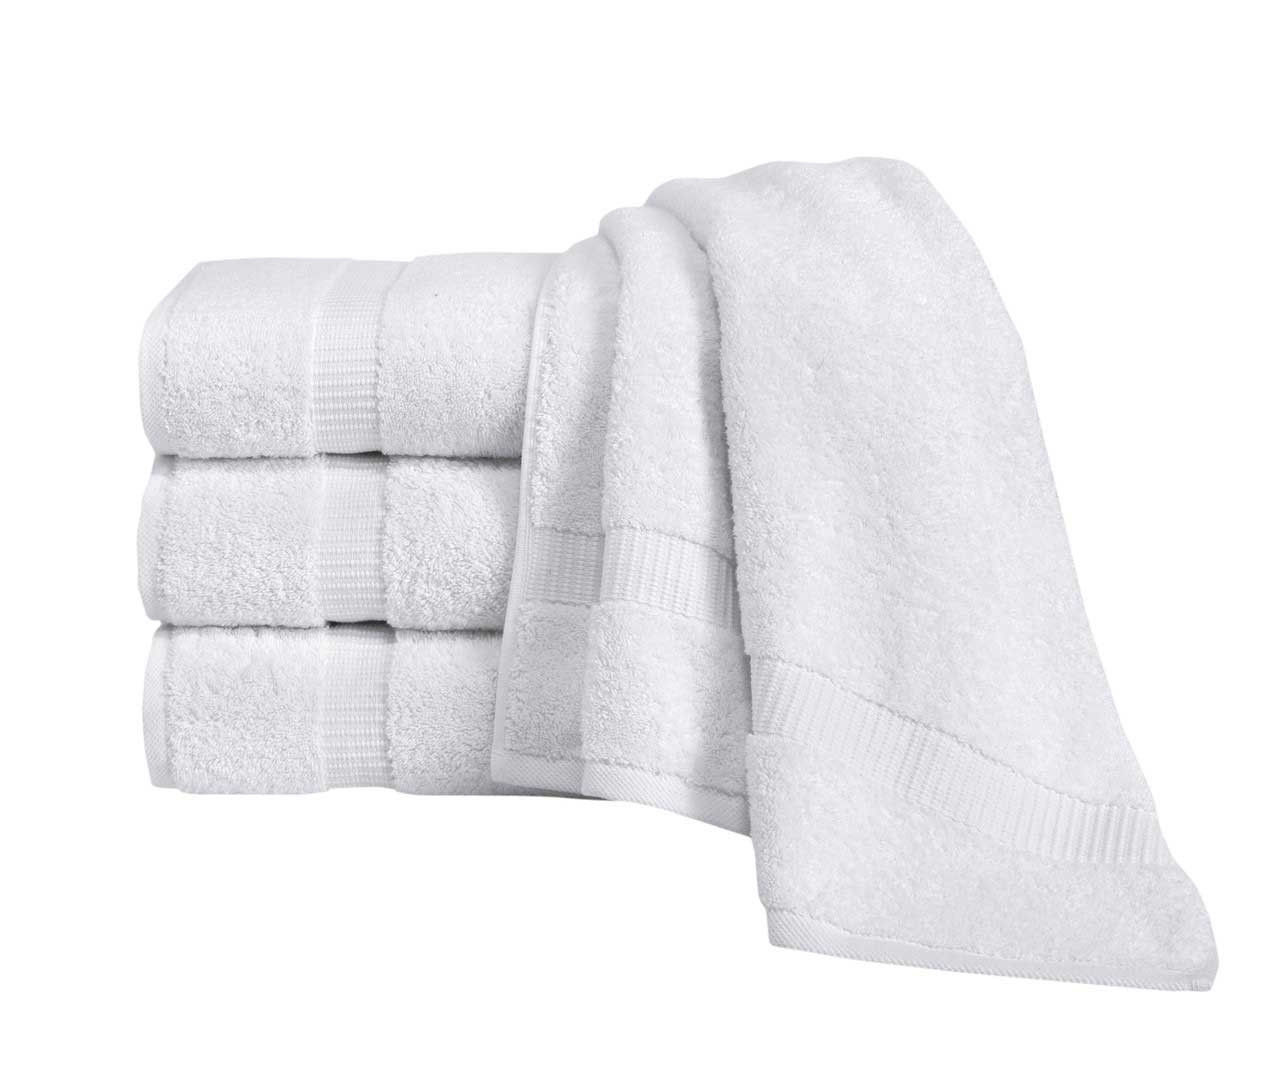 What type of loops do the towels in the White Royal Turkish Towels Villa Collection have?